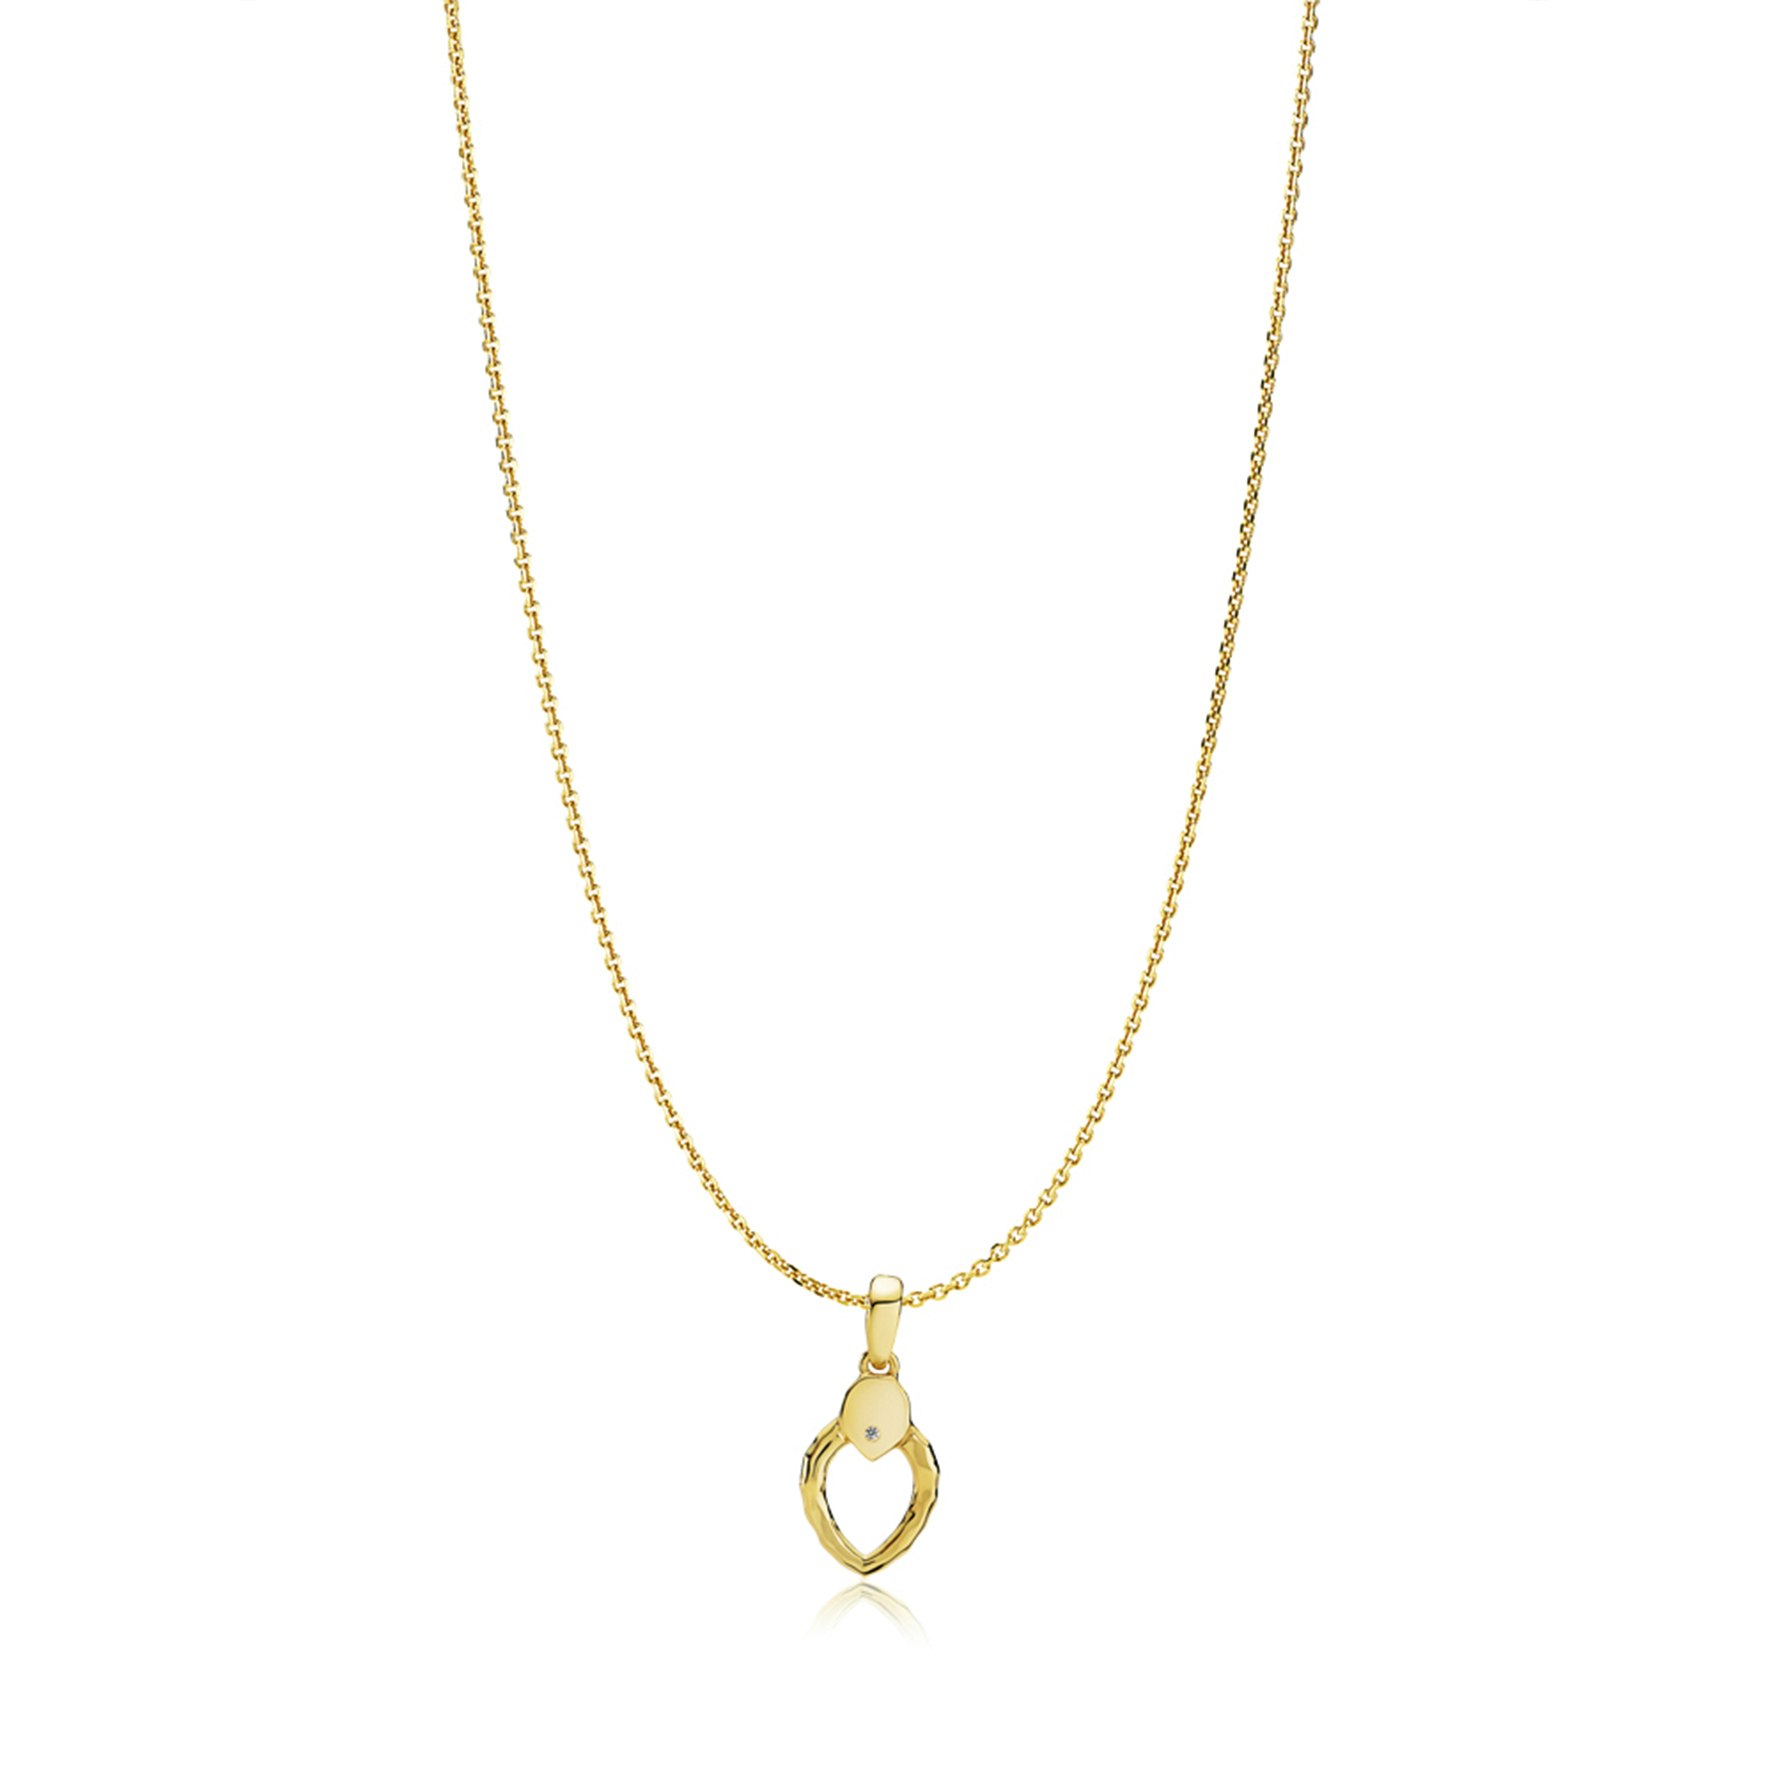 Cecilie Schmeichel Necklace from Izabel Camille in Goldplated Silver Sterling 925